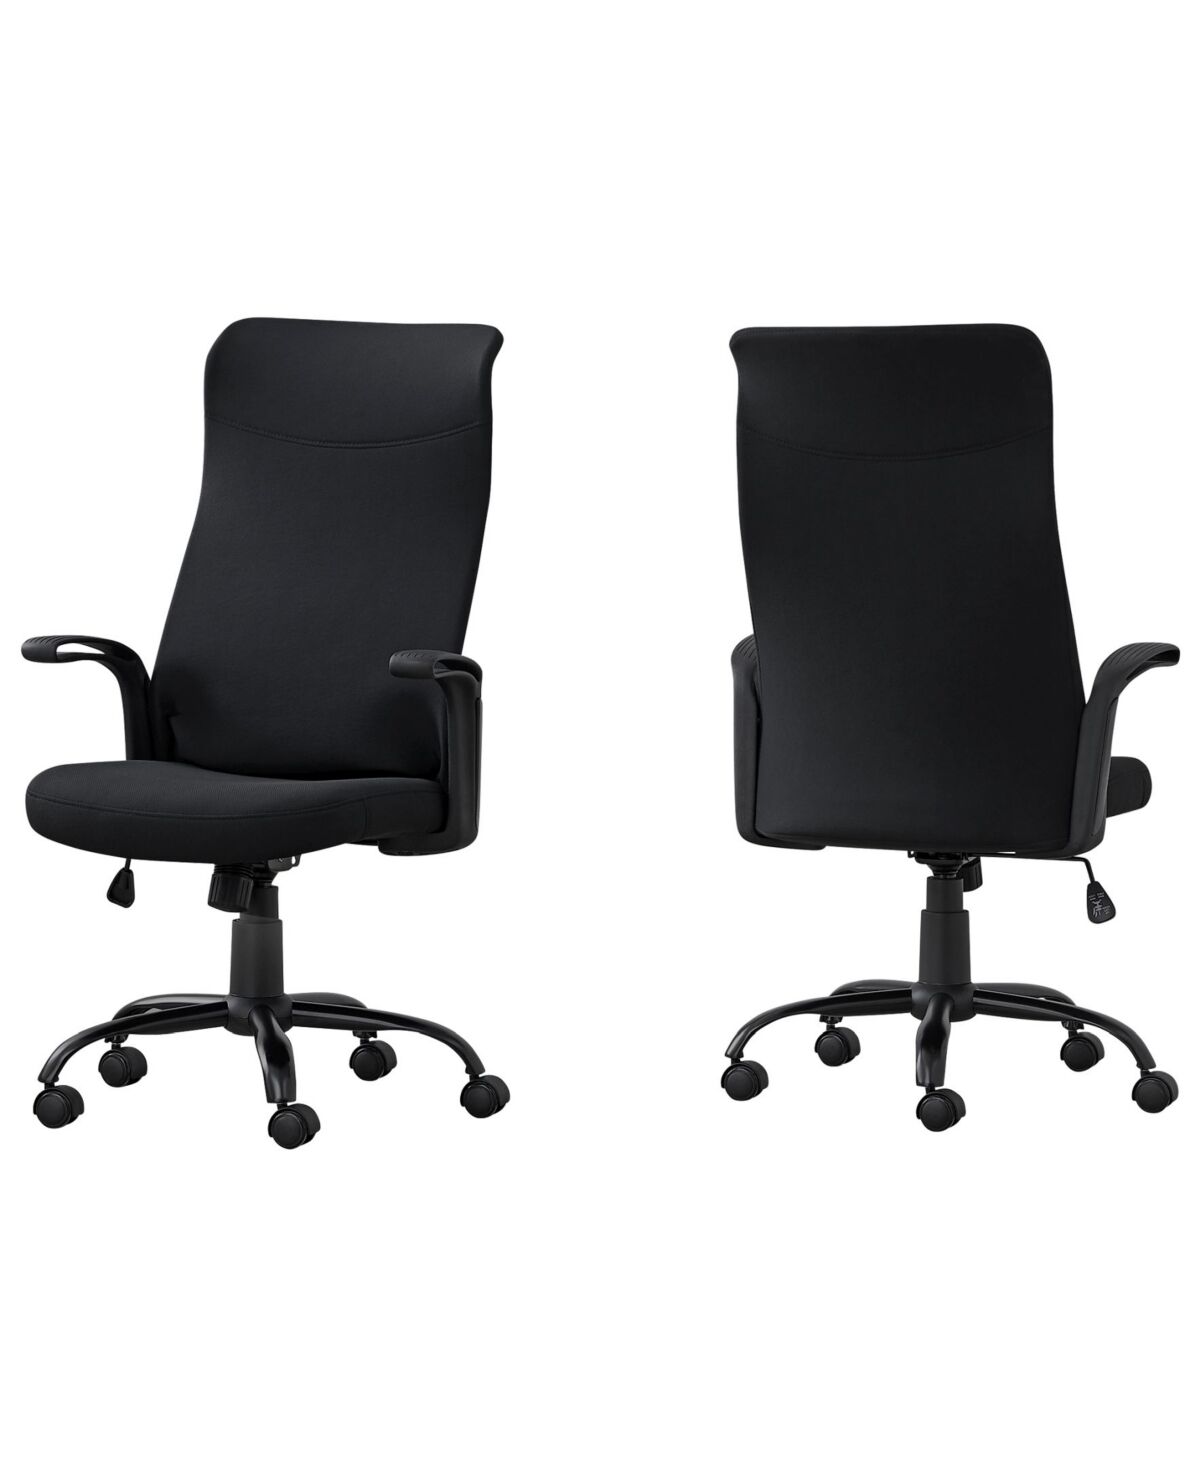 Monarch Specialties Office Chair -Fabric Multi Position - Black